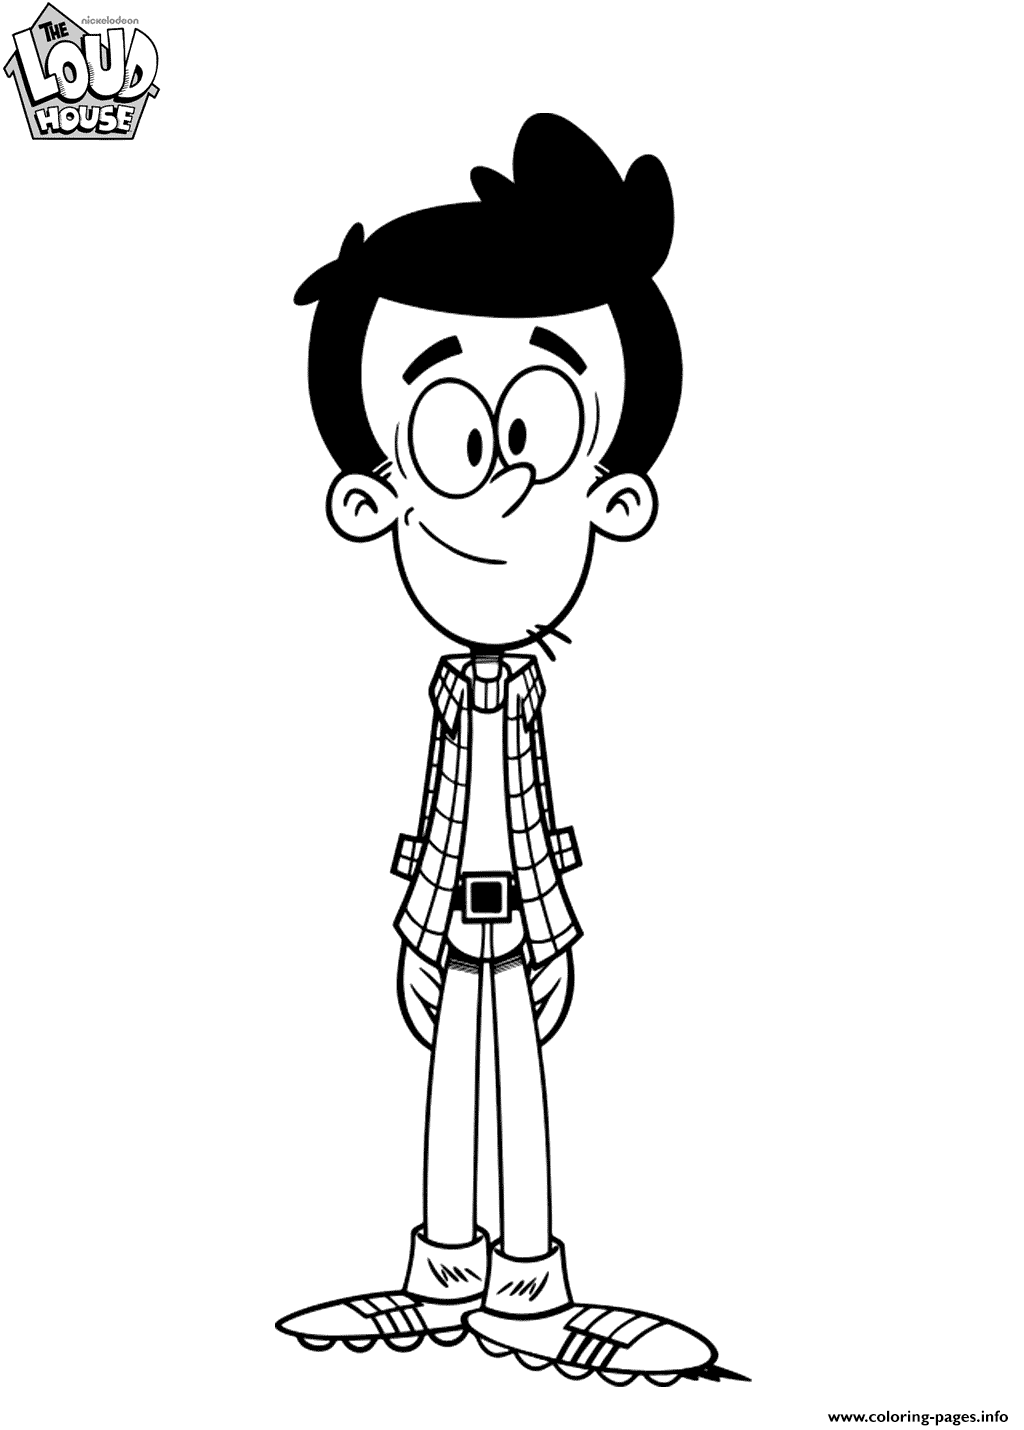 Bobby Loud House Coloring Pages Printable